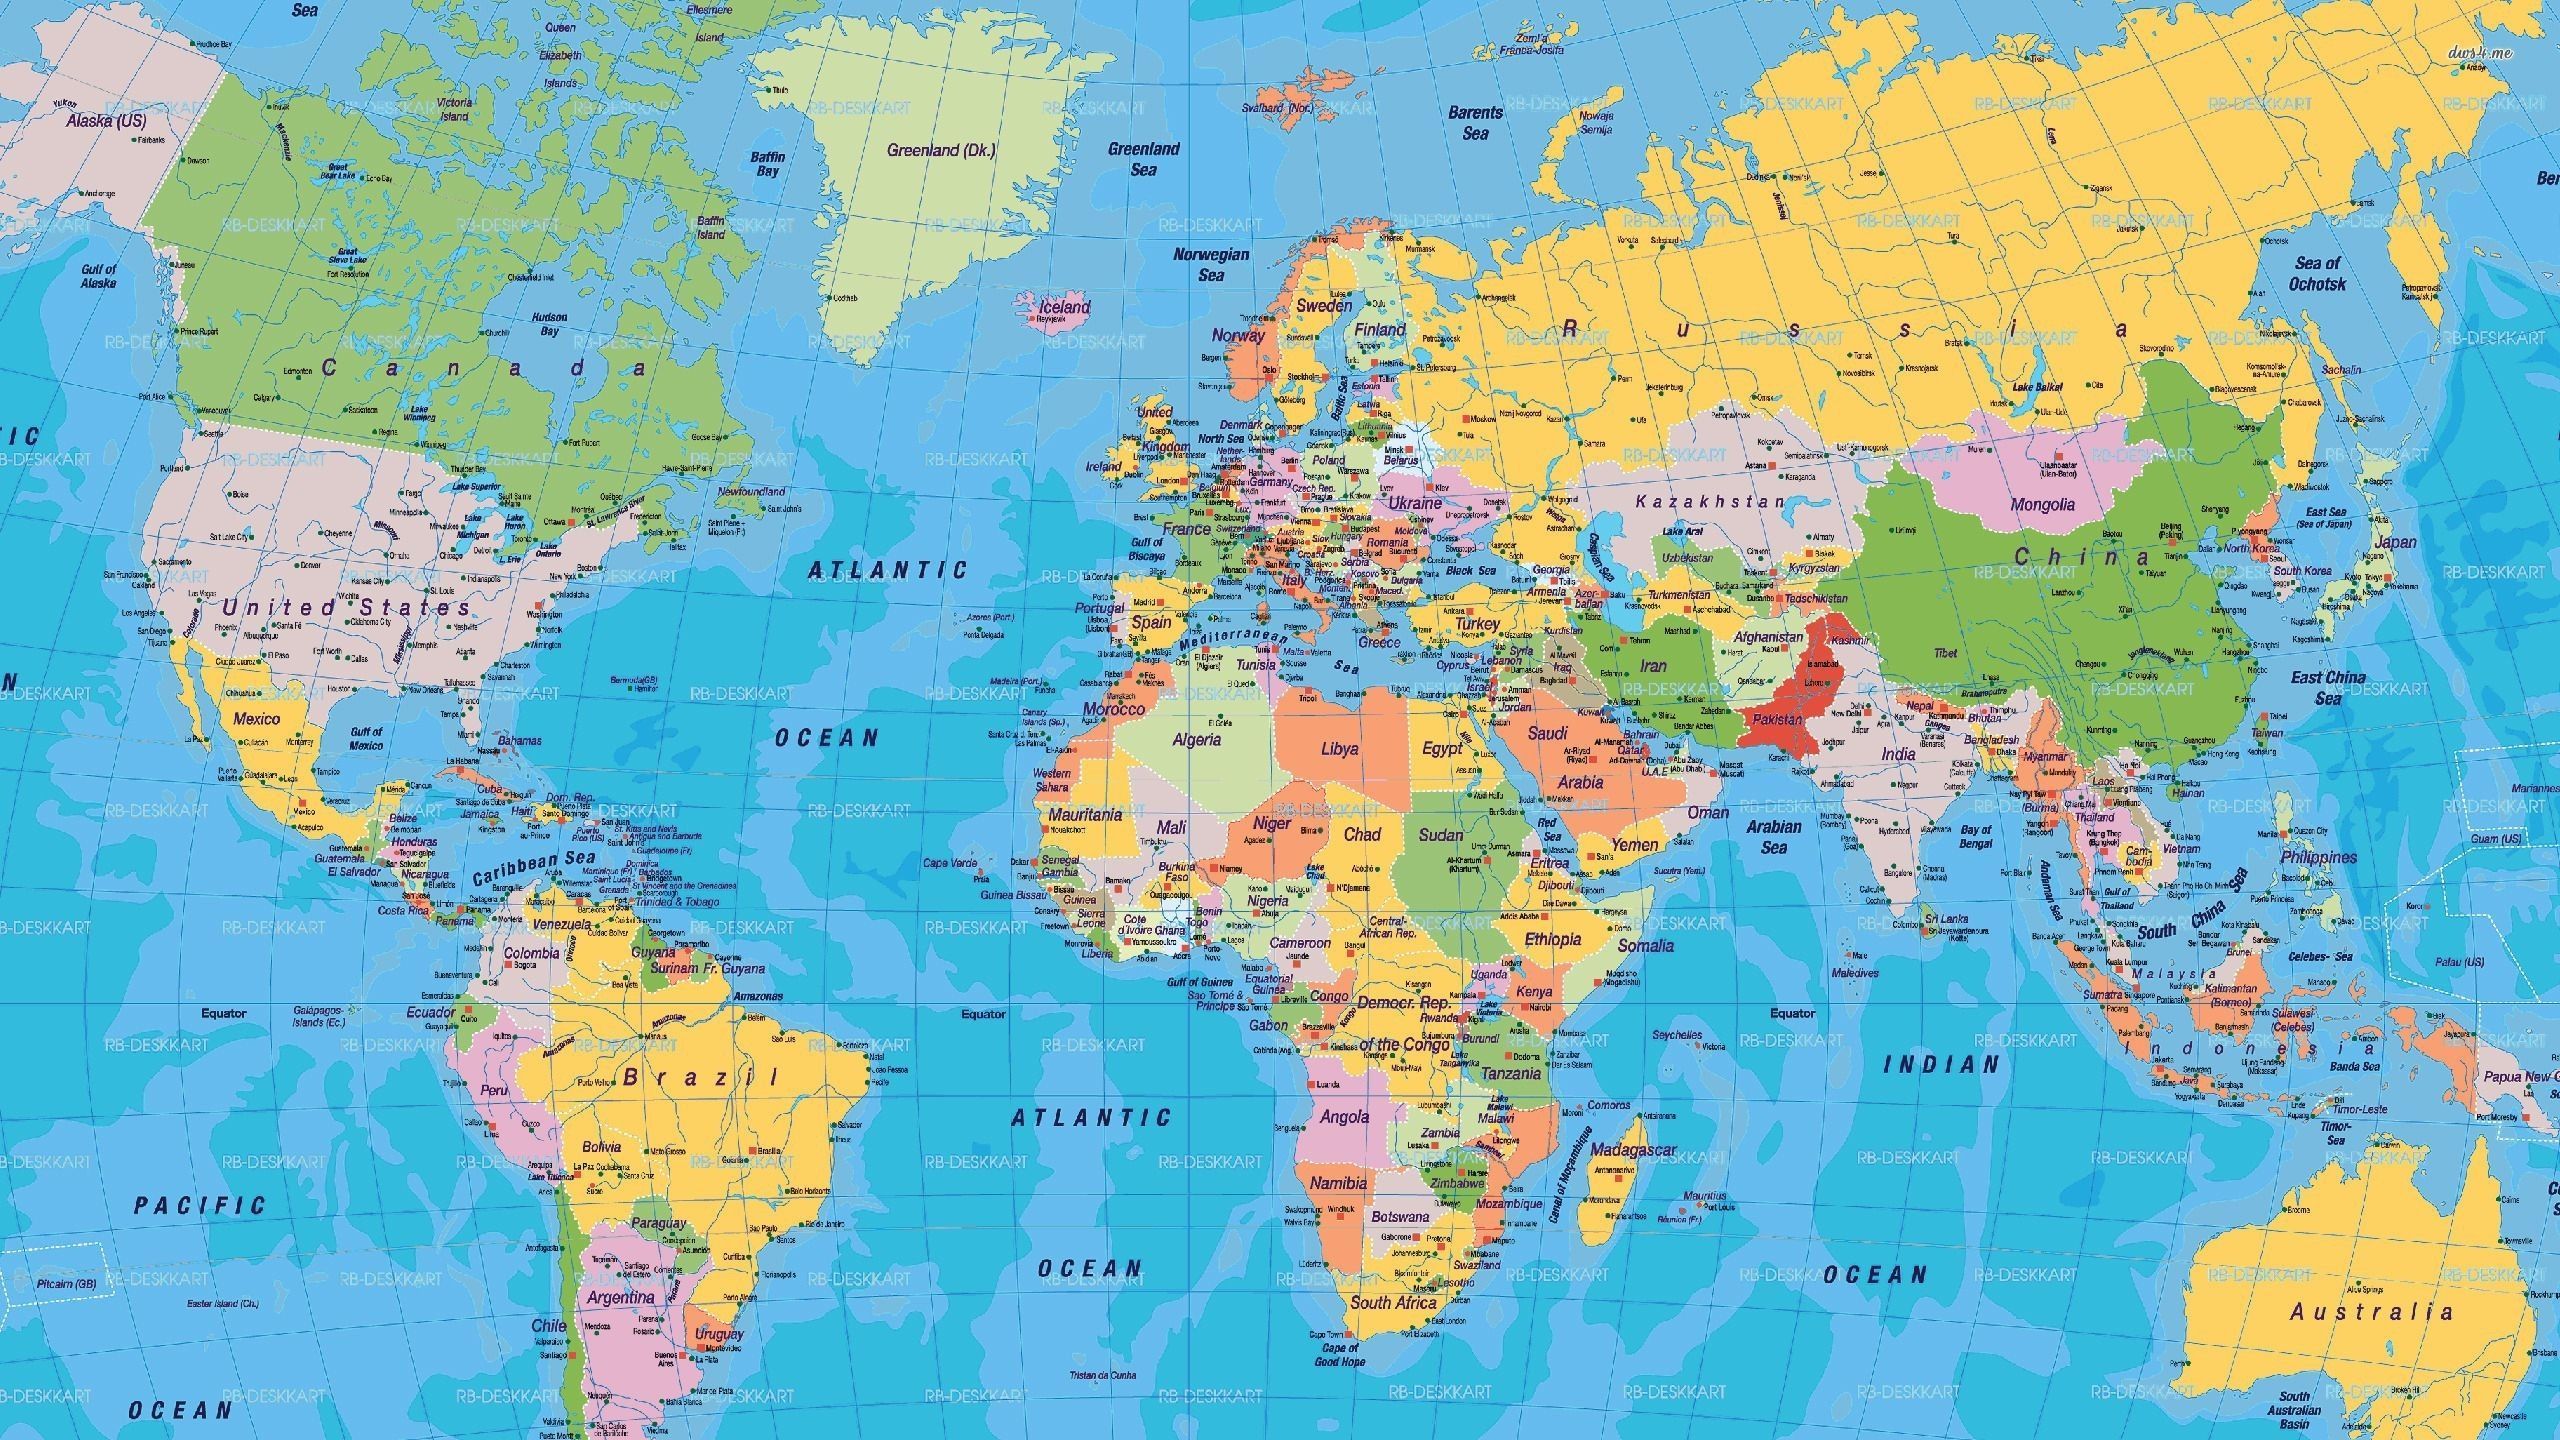 Latest World Map Computer Wallpaper FULL HD 1080p For PC Background. World map printable, World map wallpaper, Cool world map